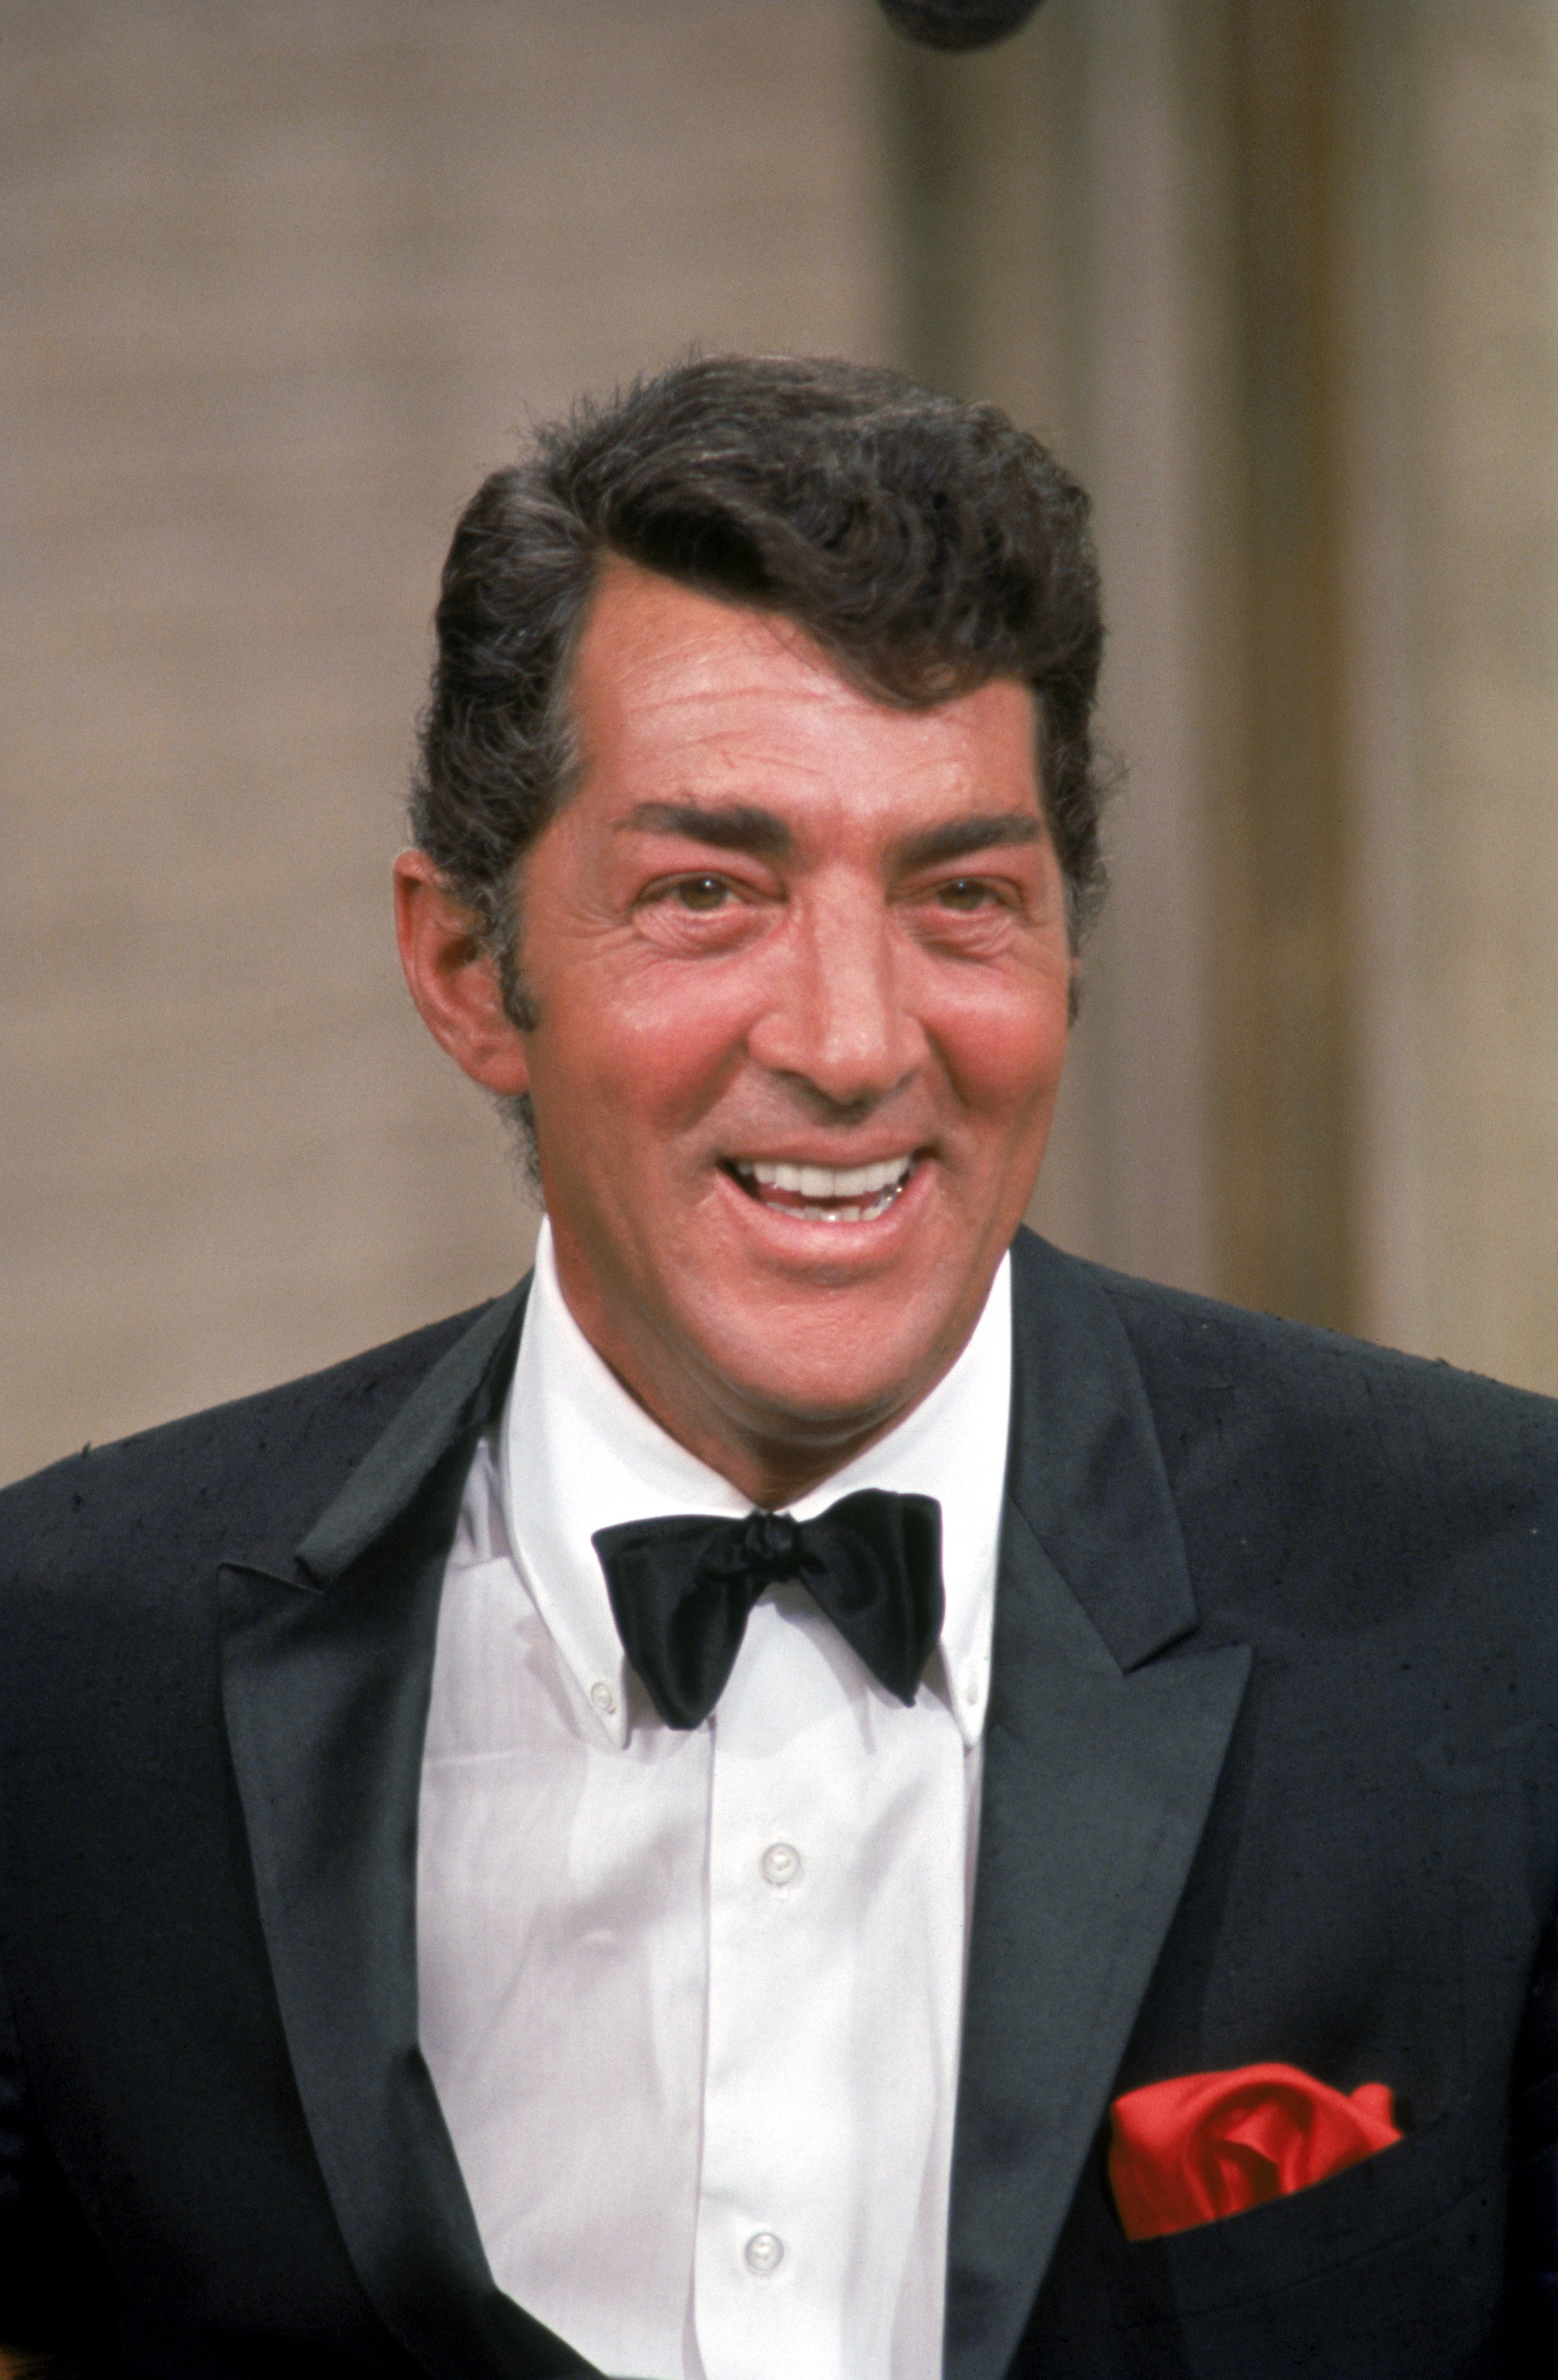 Dean Martin on the set during filming of "The Dean Martin show" in 1967 | Photo: GettyImages